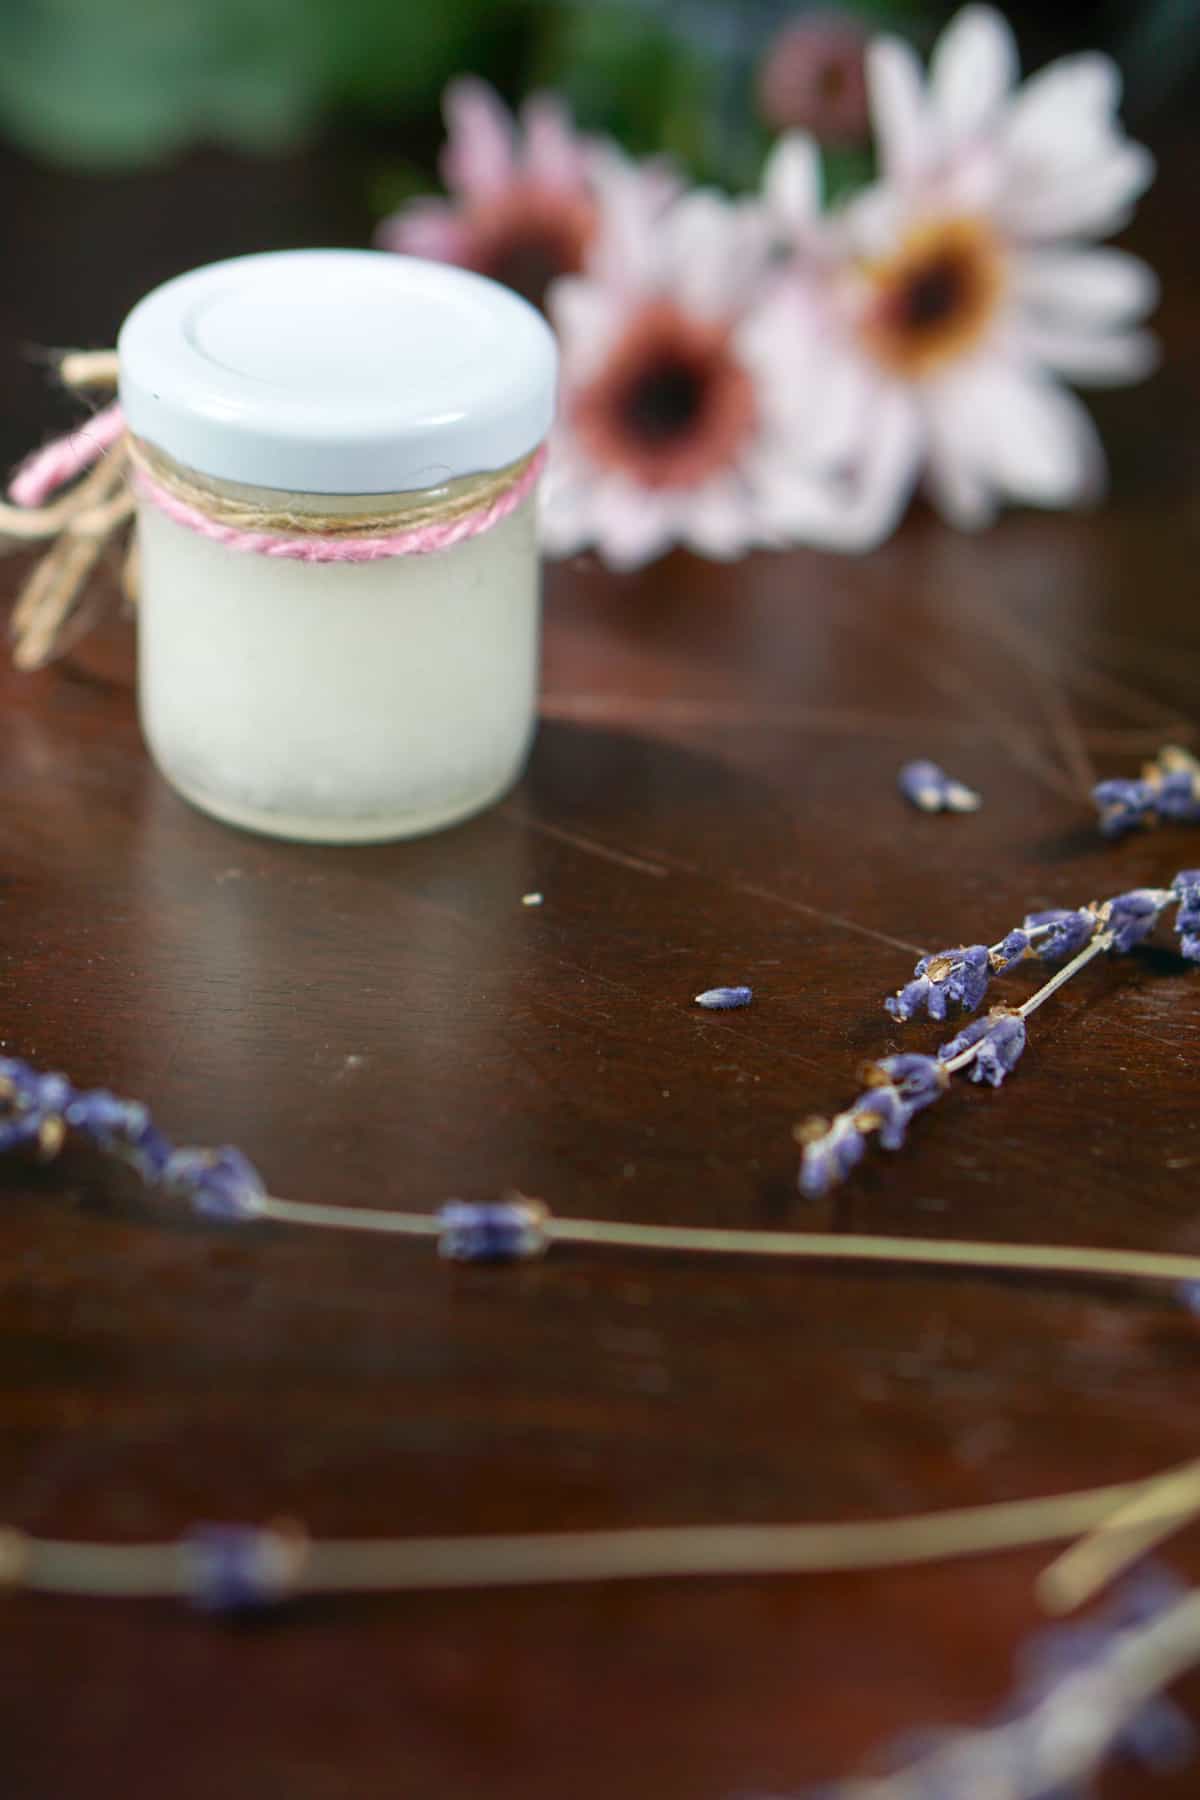 All Natural Bug Repellent - made with only coconut oil and essential oils